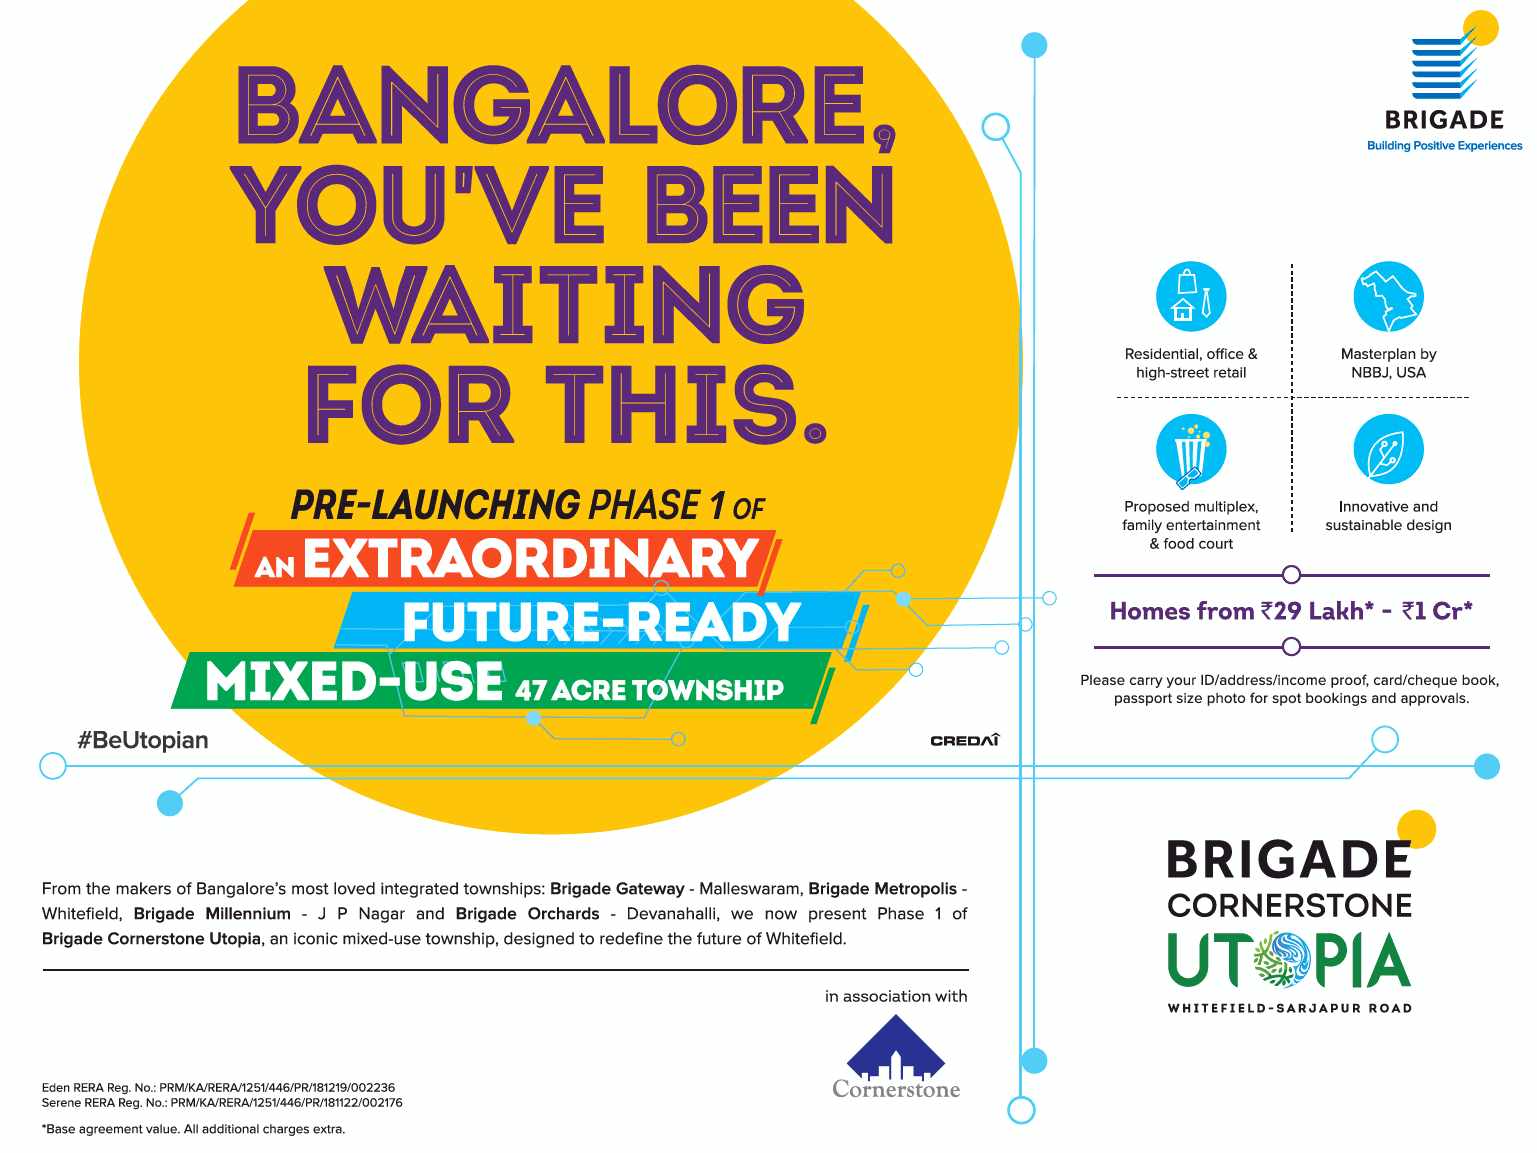 Pre-launching phase 1 at Brigade Utopia in Bangalore